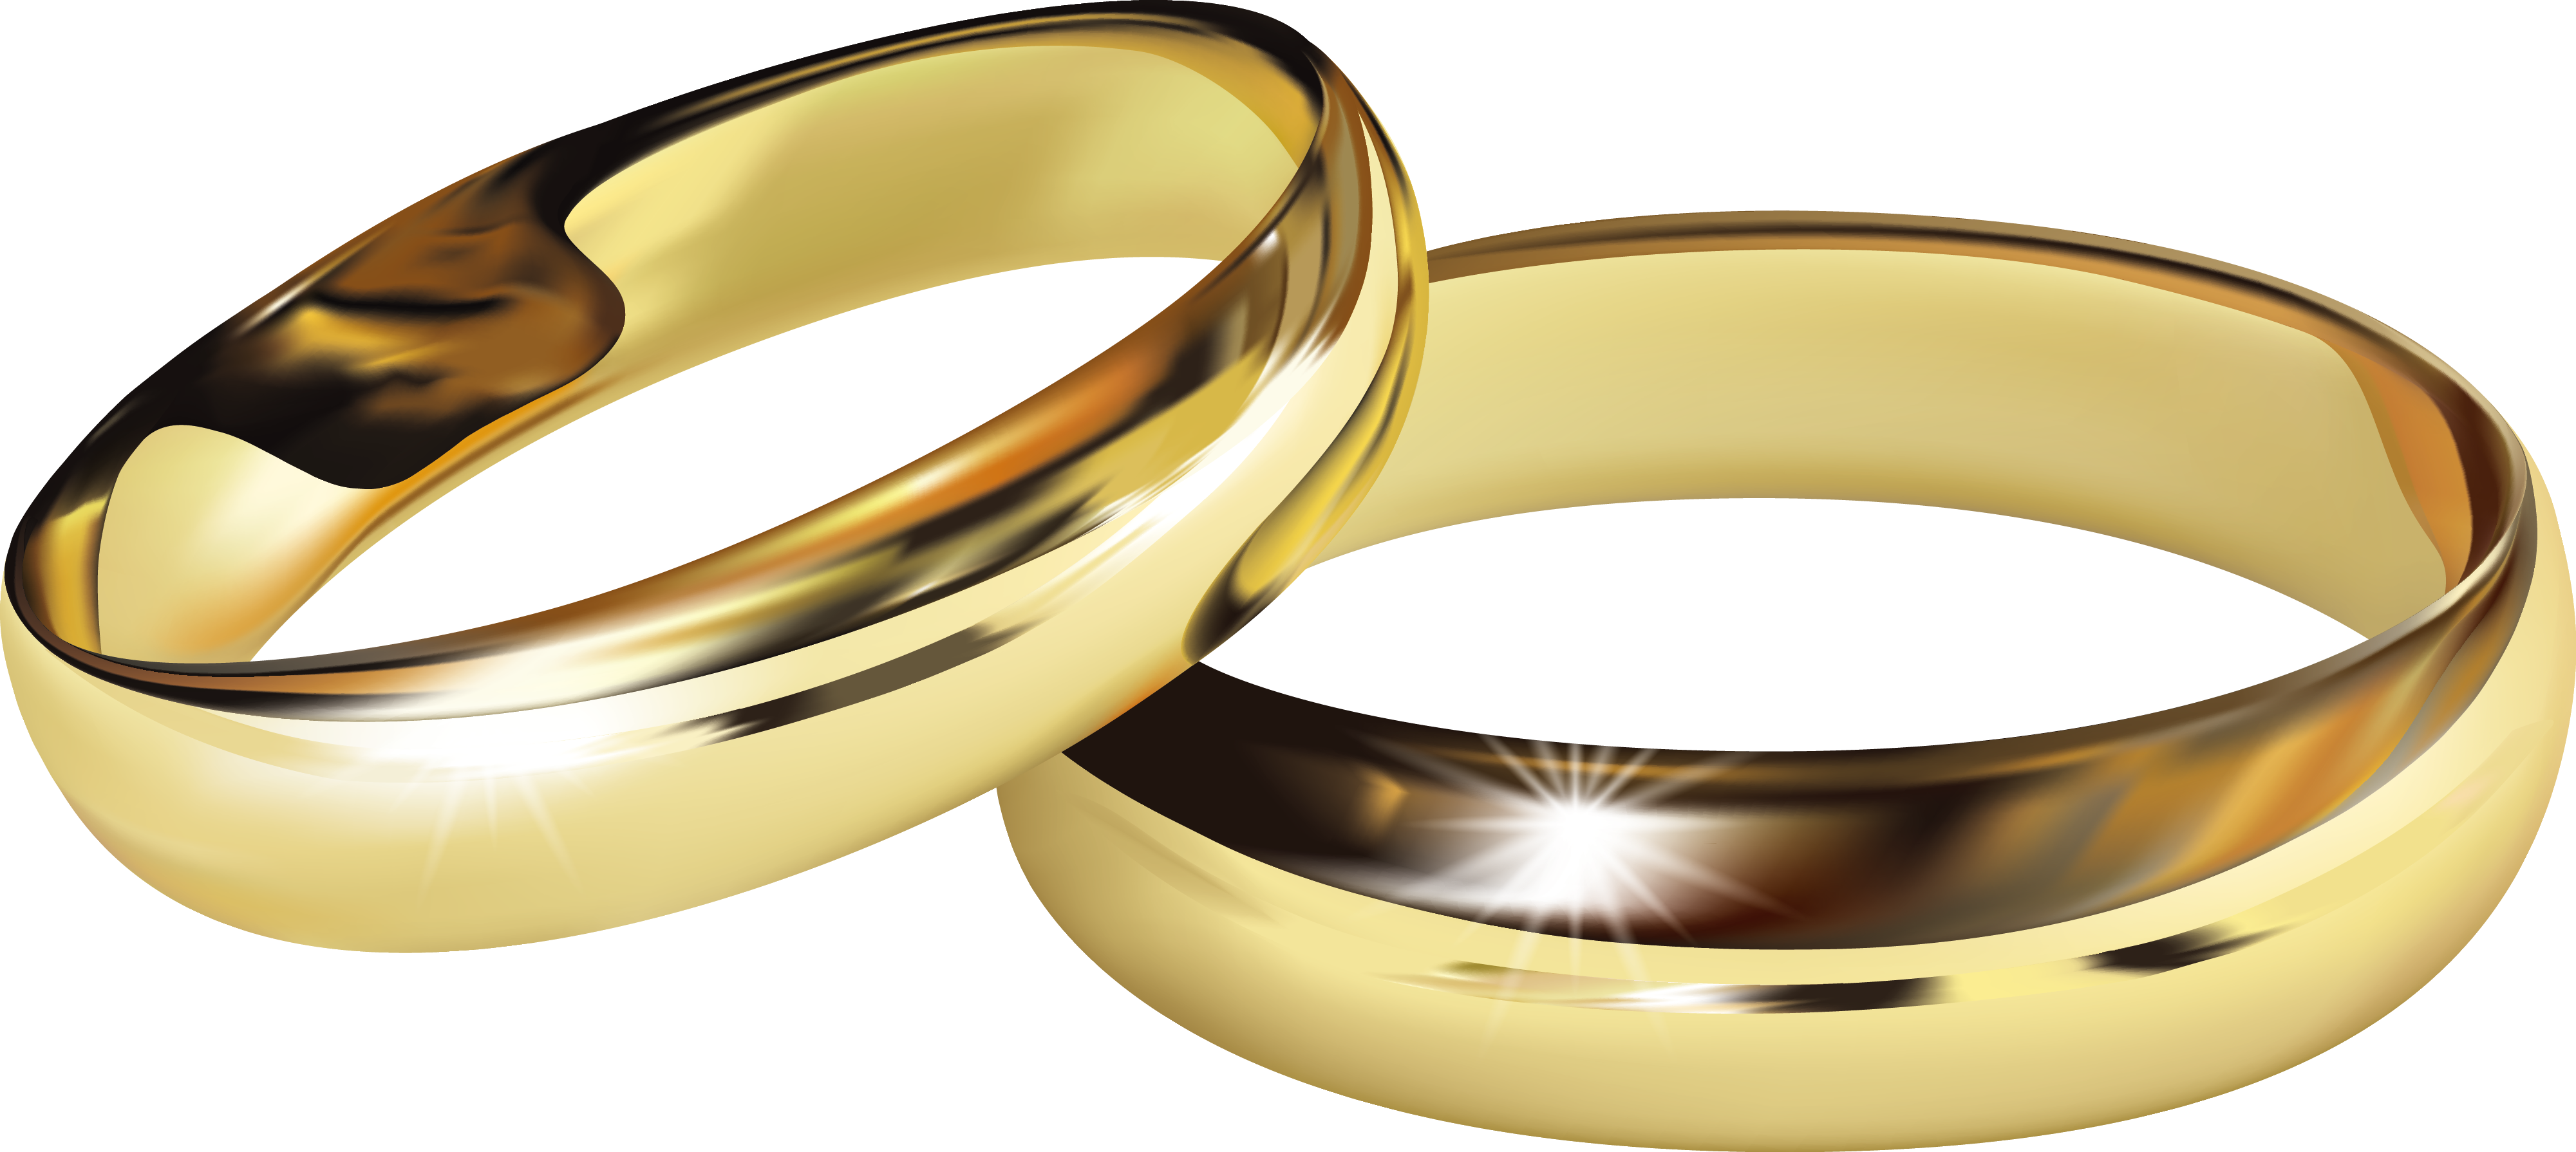 Engagement Ring Png Hd Free - Wedding Ring Engagement Ring   Golden Wedding Ring Vector, Transparent background PNG HD thumbnail